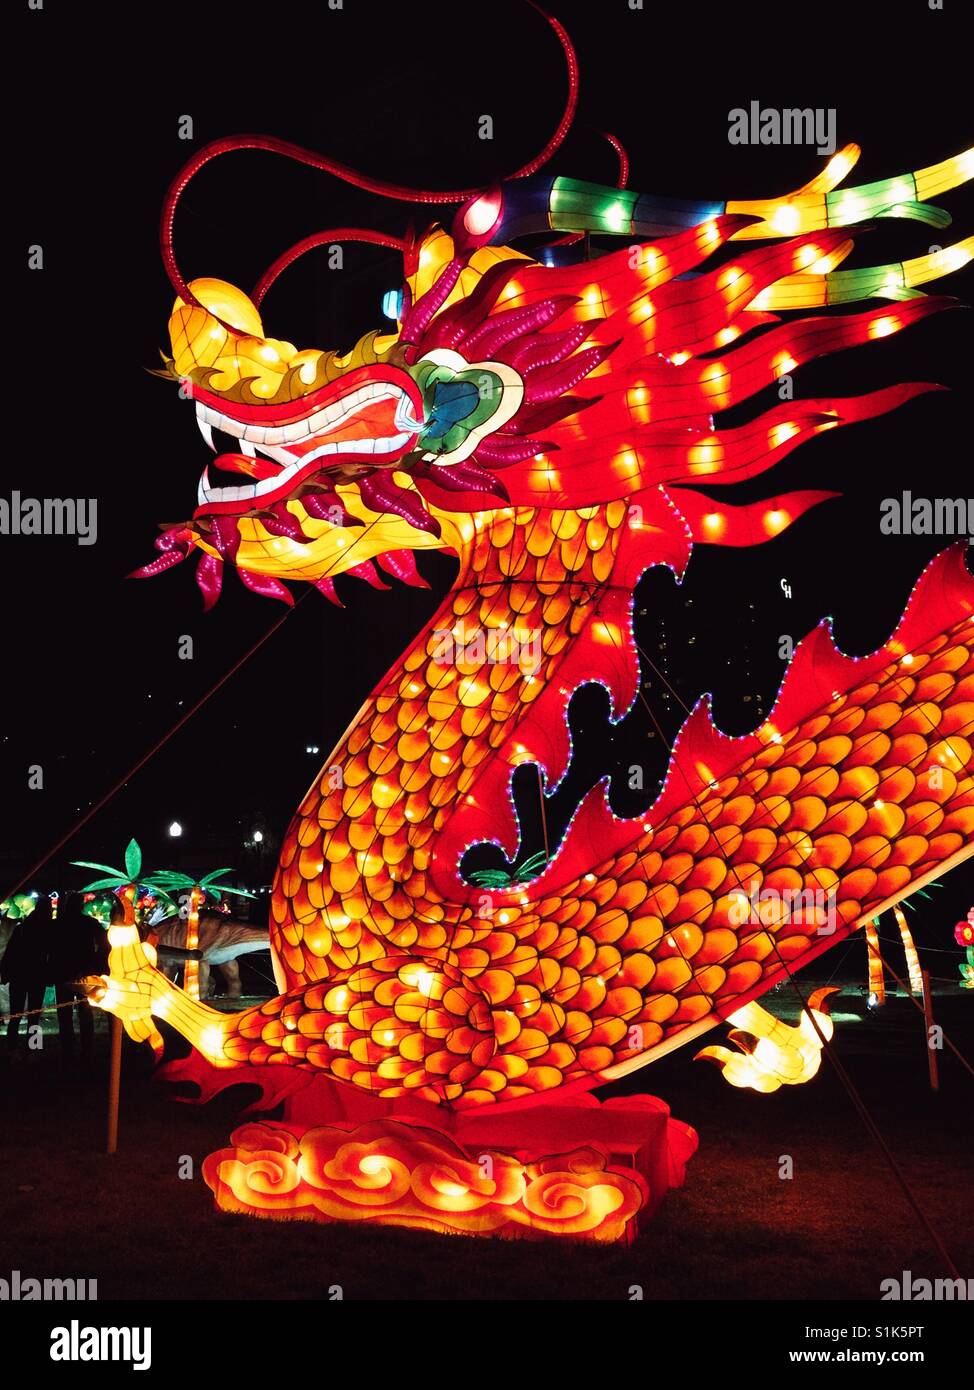 Glowing soft sculpture of the dragon at Festival of Lights in Spokane Stock Photo